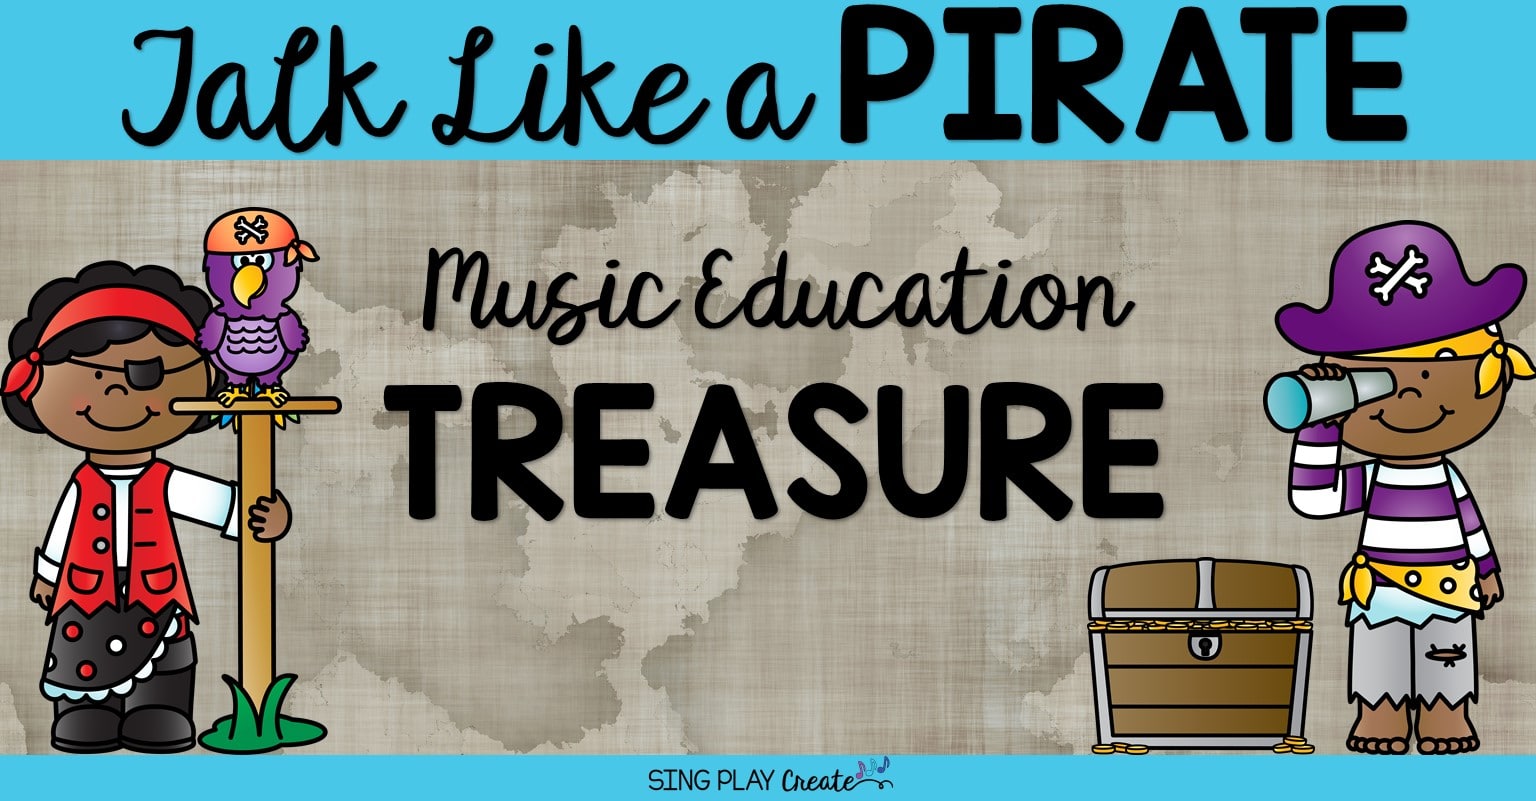 You are currently viewing “National Talk Like a Pirate Day”  Music Education Treasures